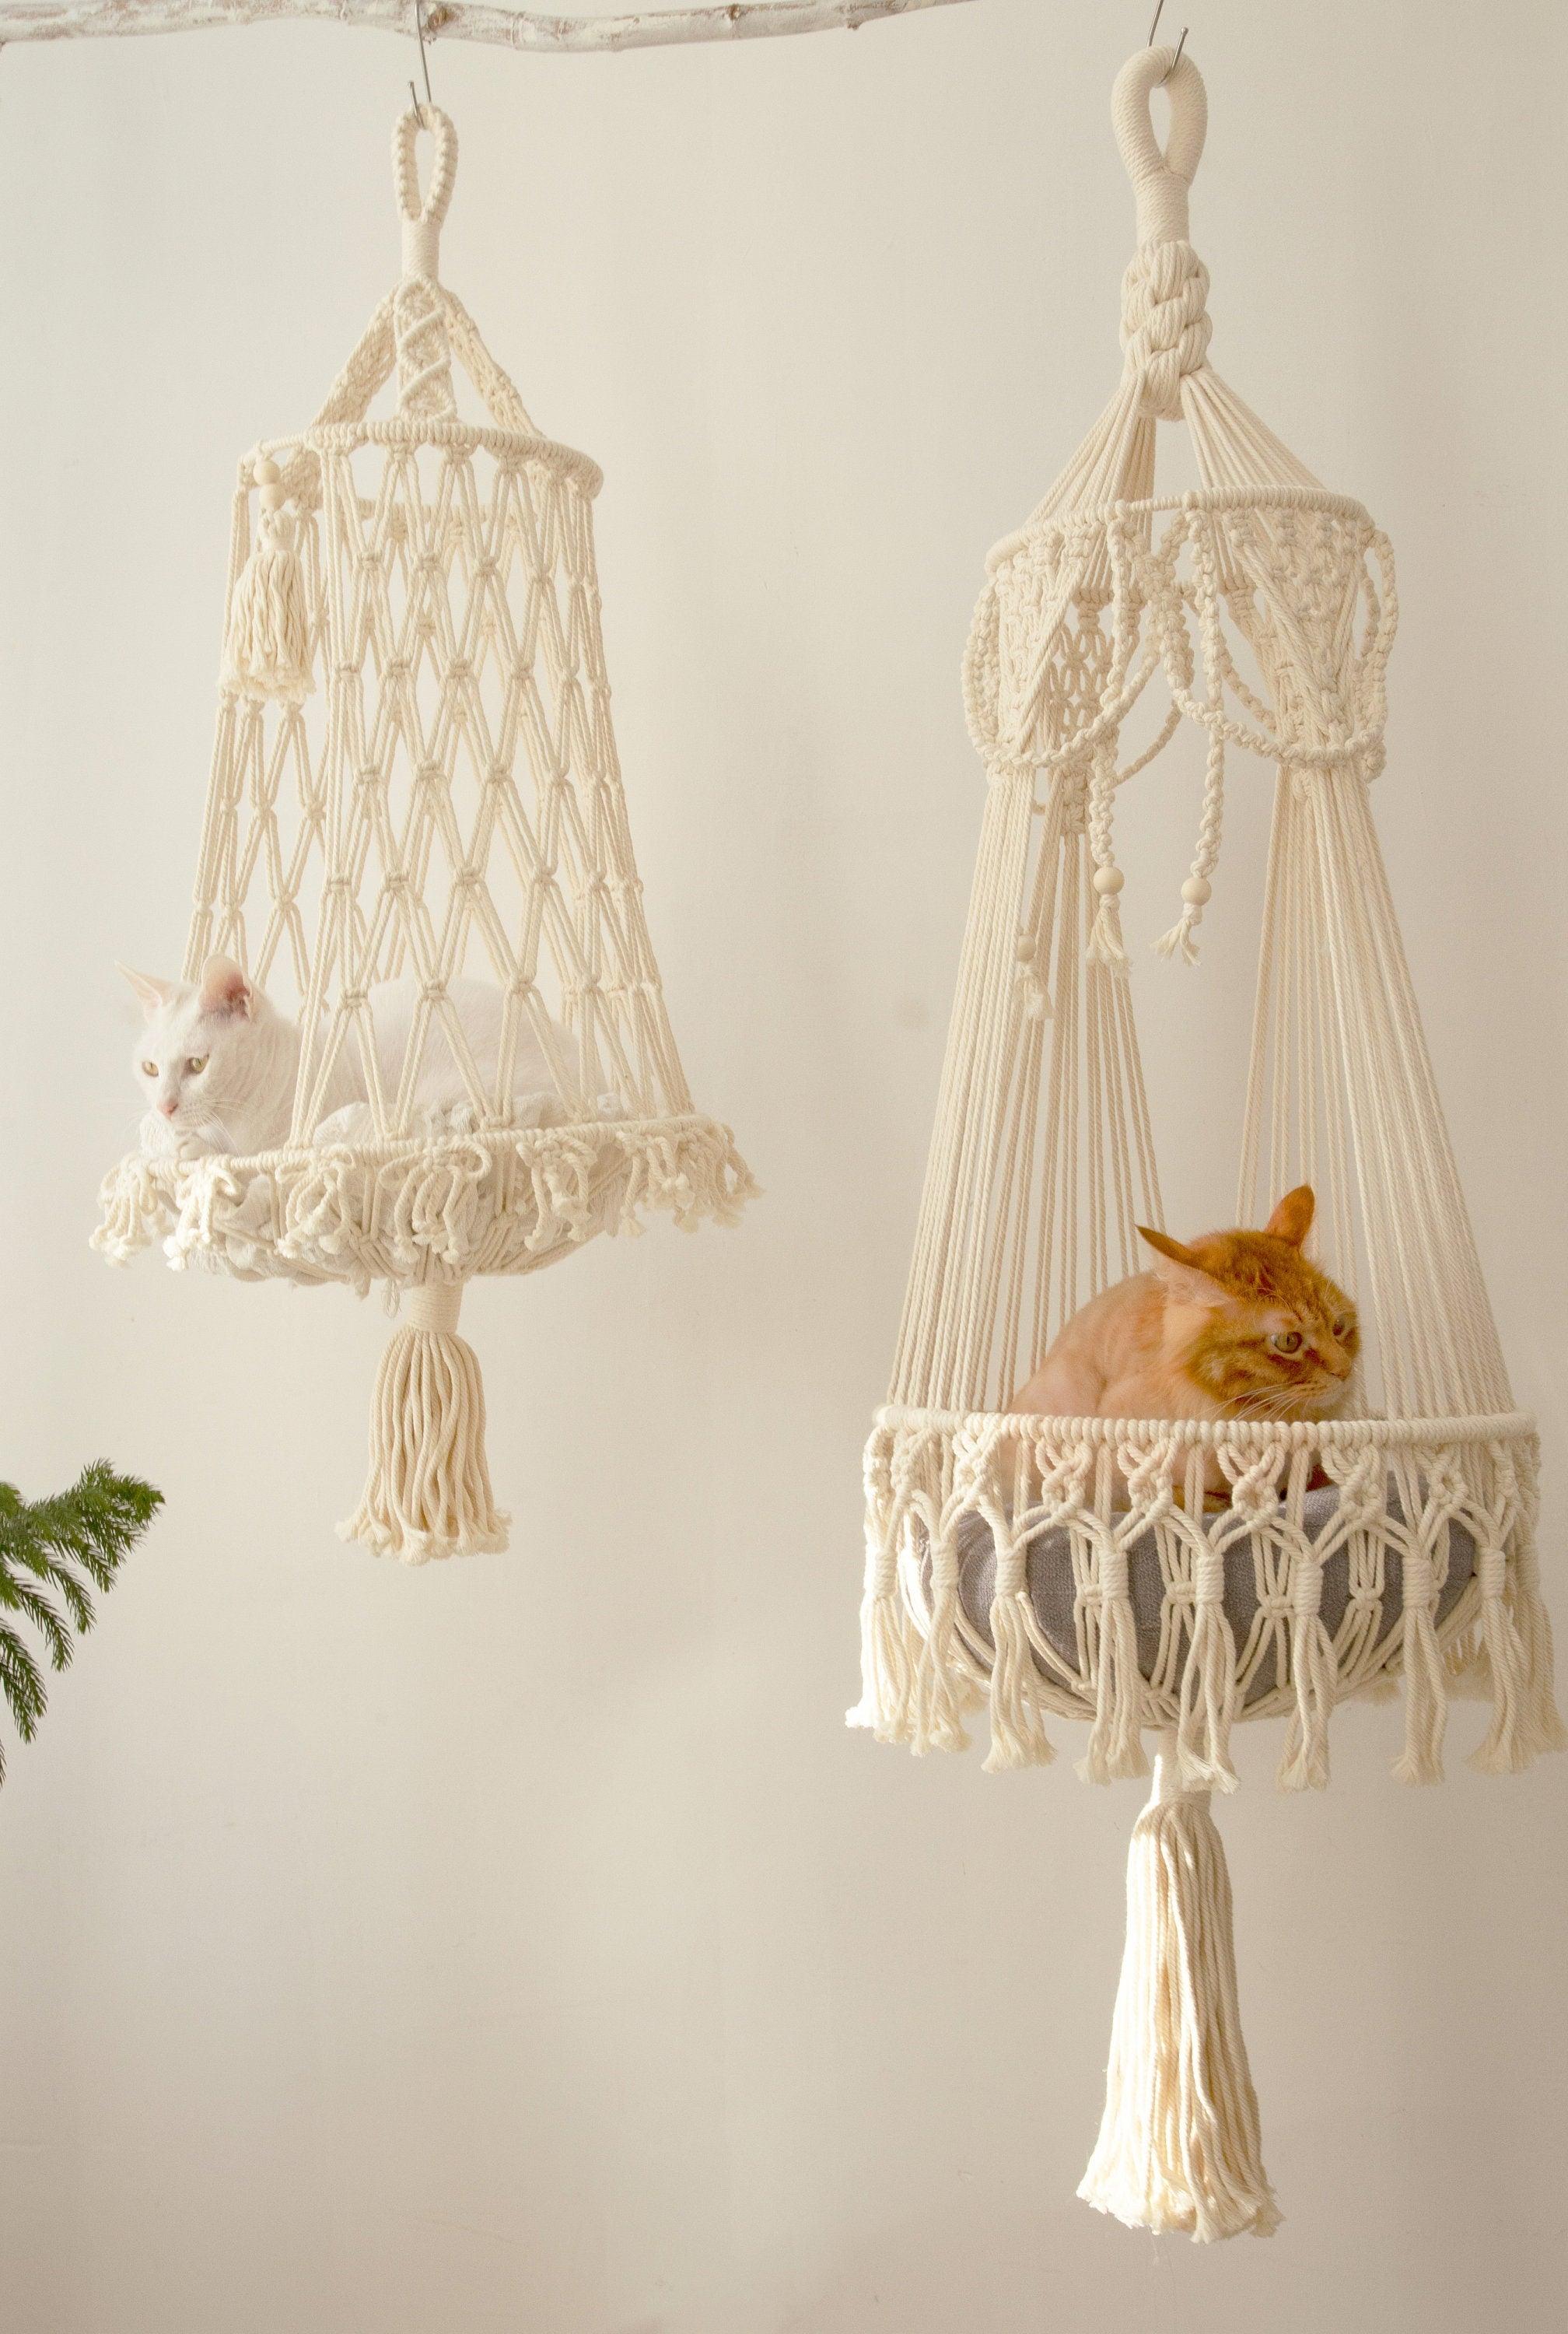 Cozy kitty Swing - Hanging Cat Bed